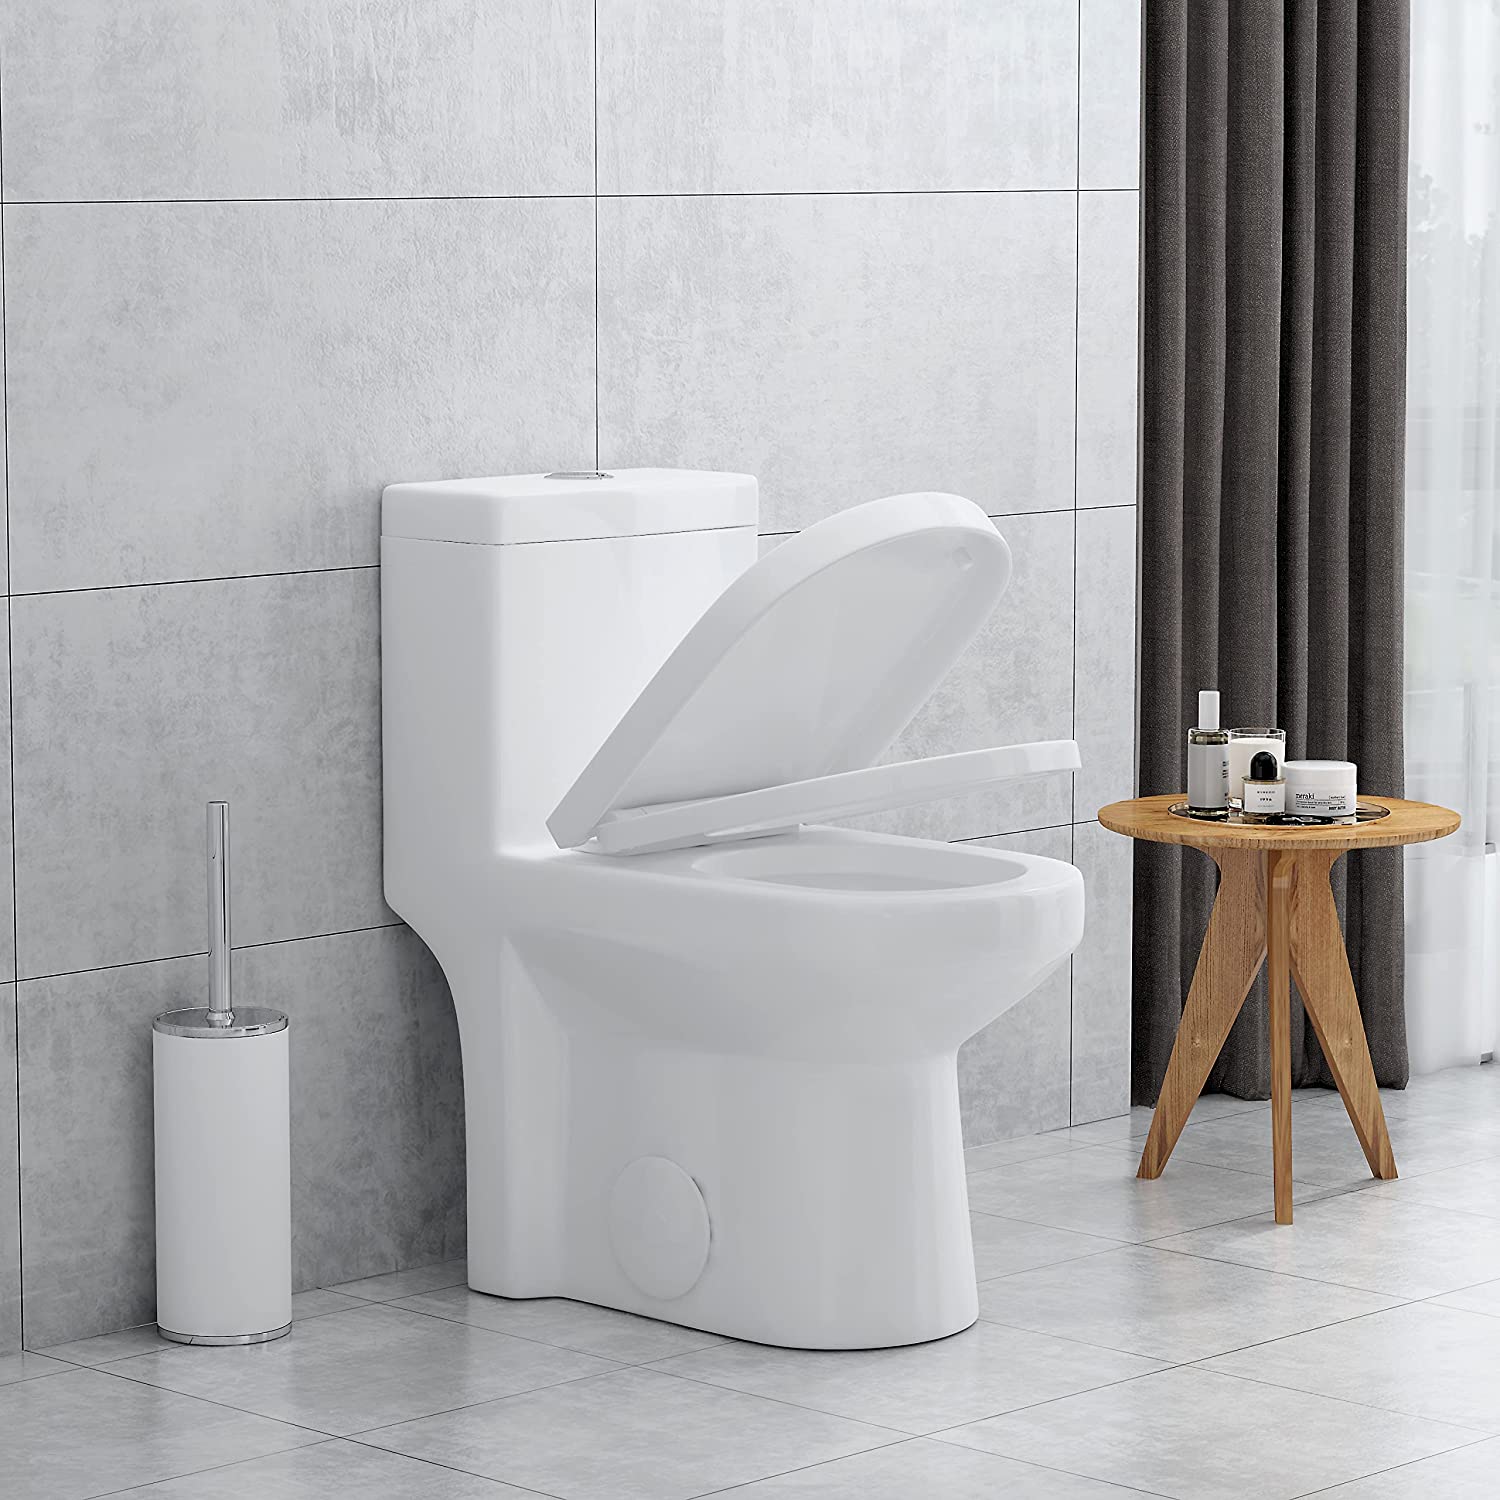 HOROW Small Compact Toilet For Bathroom